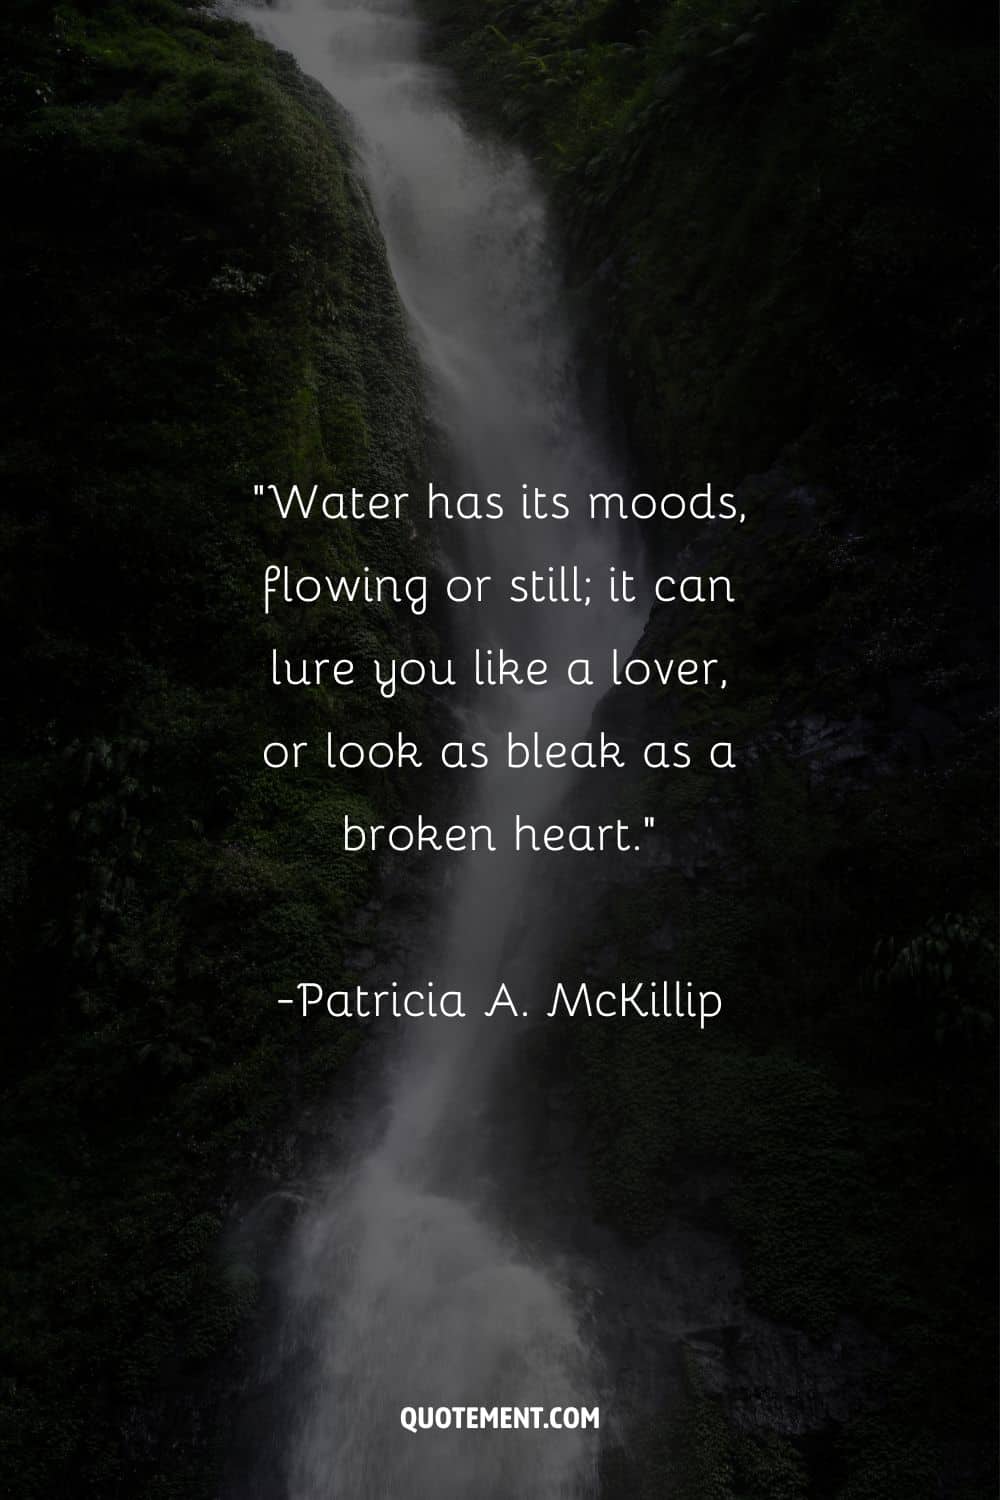 Powerful quote on water by Patricia A. McKillip and a waterfall in the background
